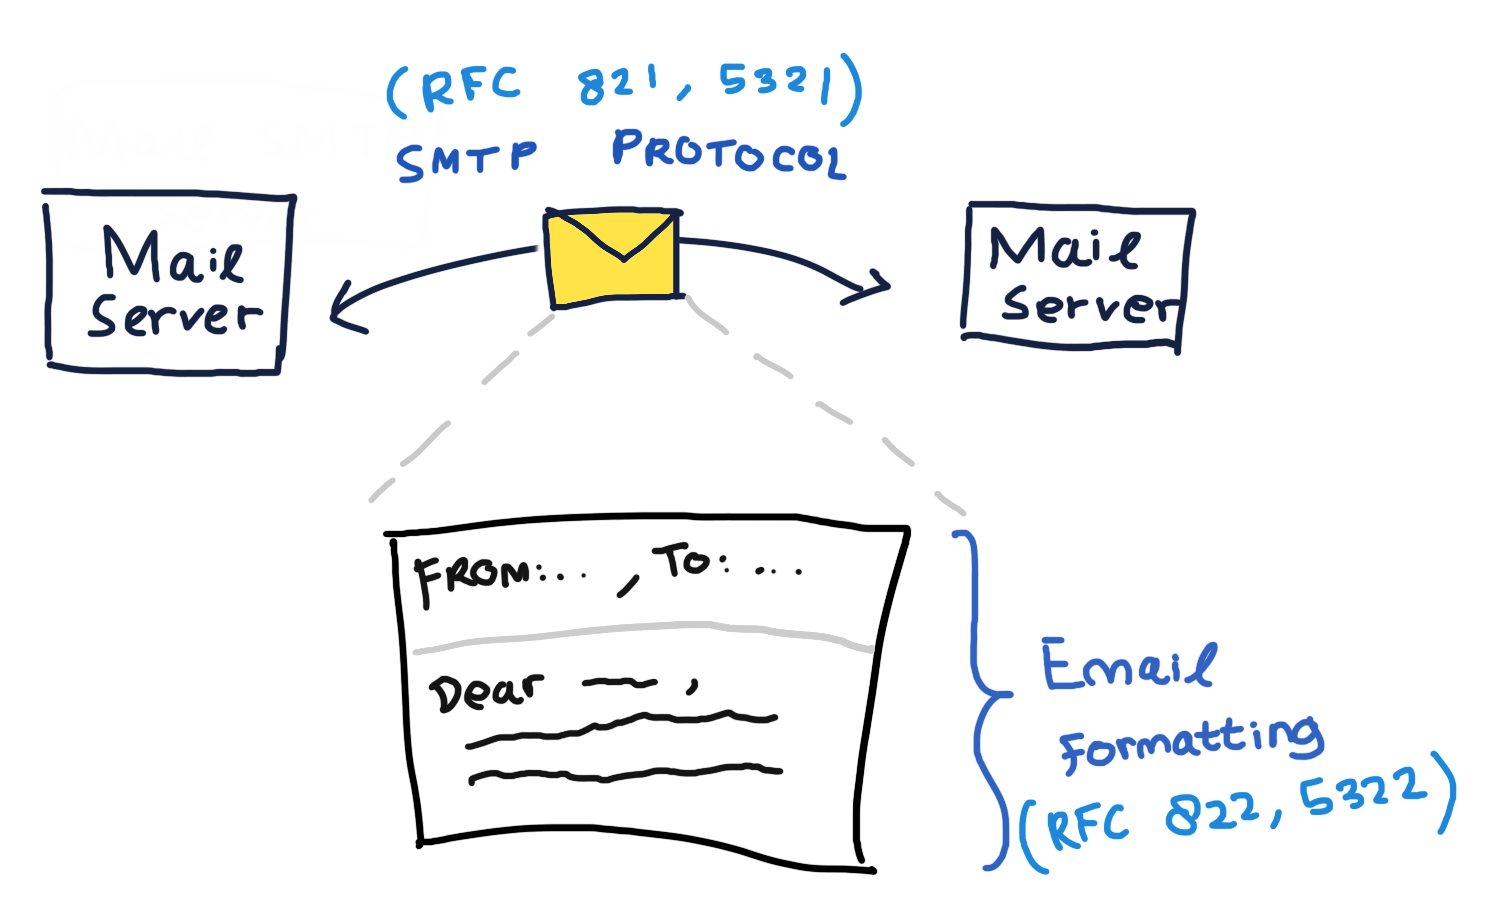 Difference between SMTP protocol and email format